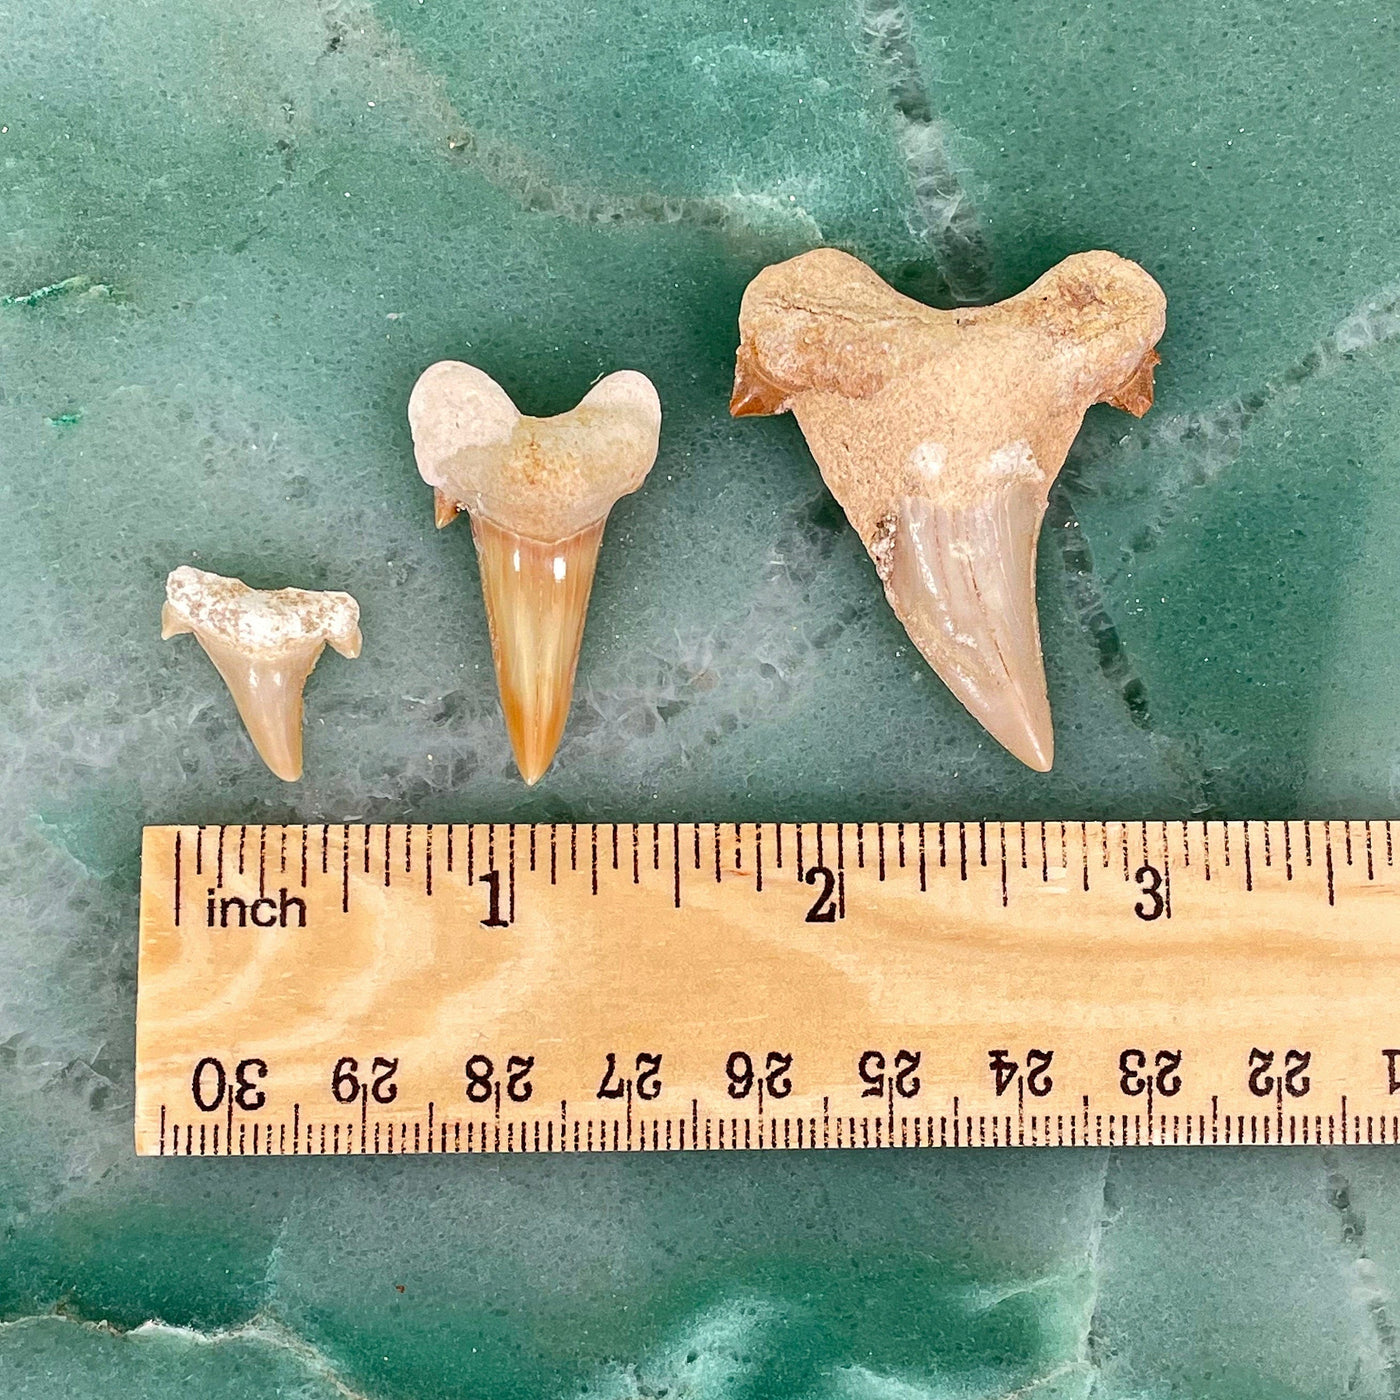 one of each fossilized shark tooth size on display with ruler for size comparison